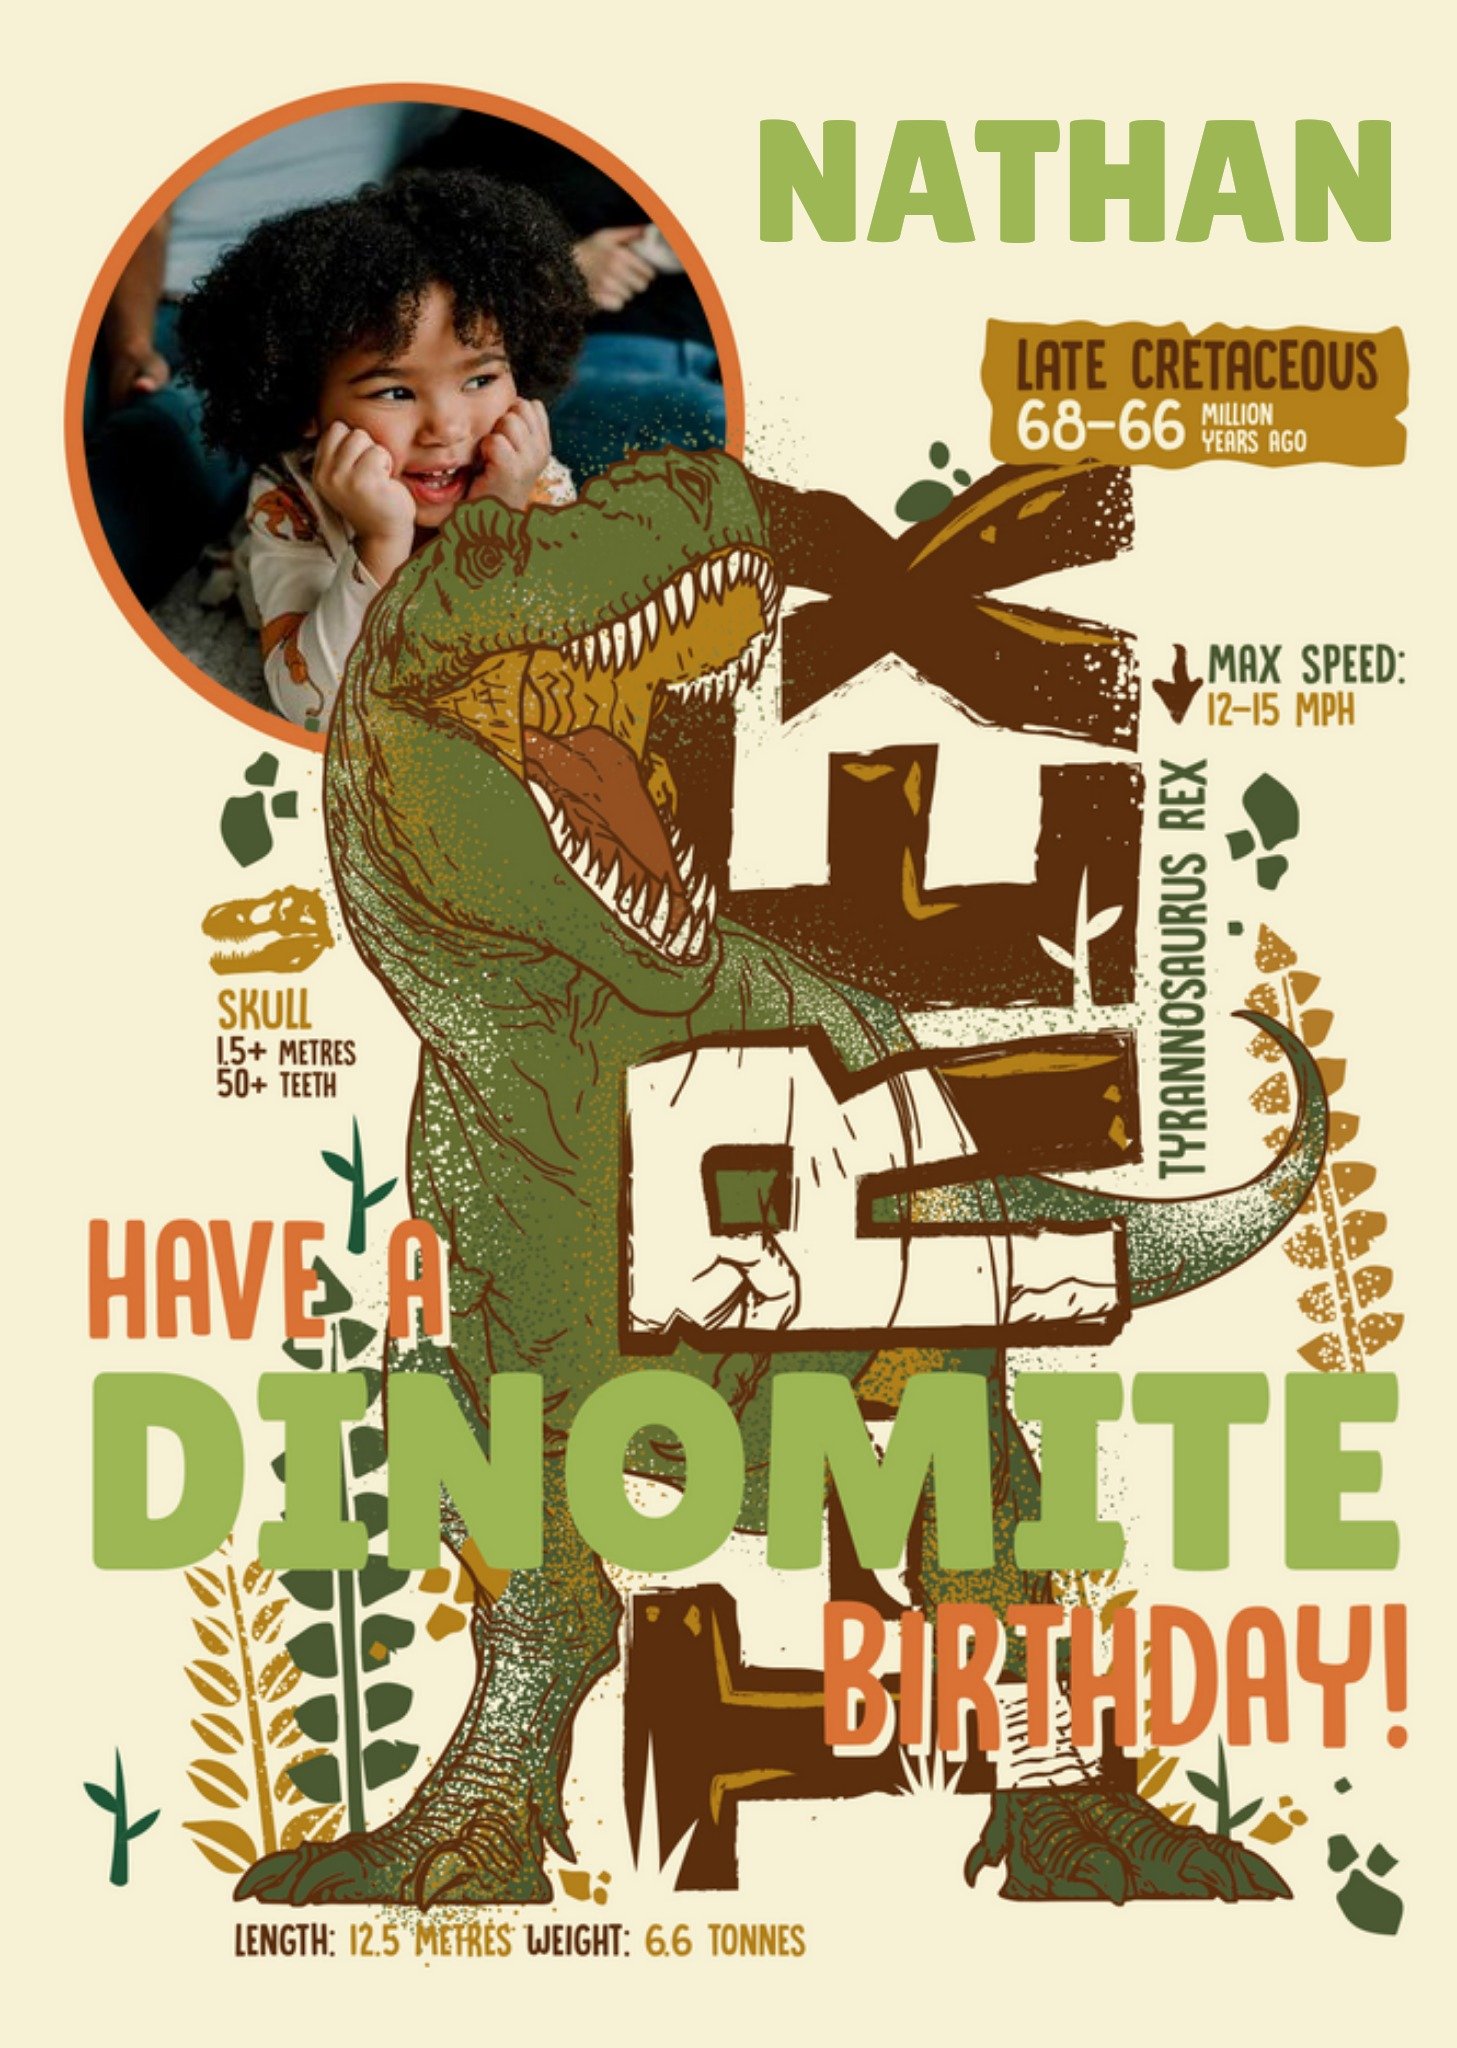 The Natural History Museum Natural History Museum T-Rex Photo Upload Birthday Card Ecard